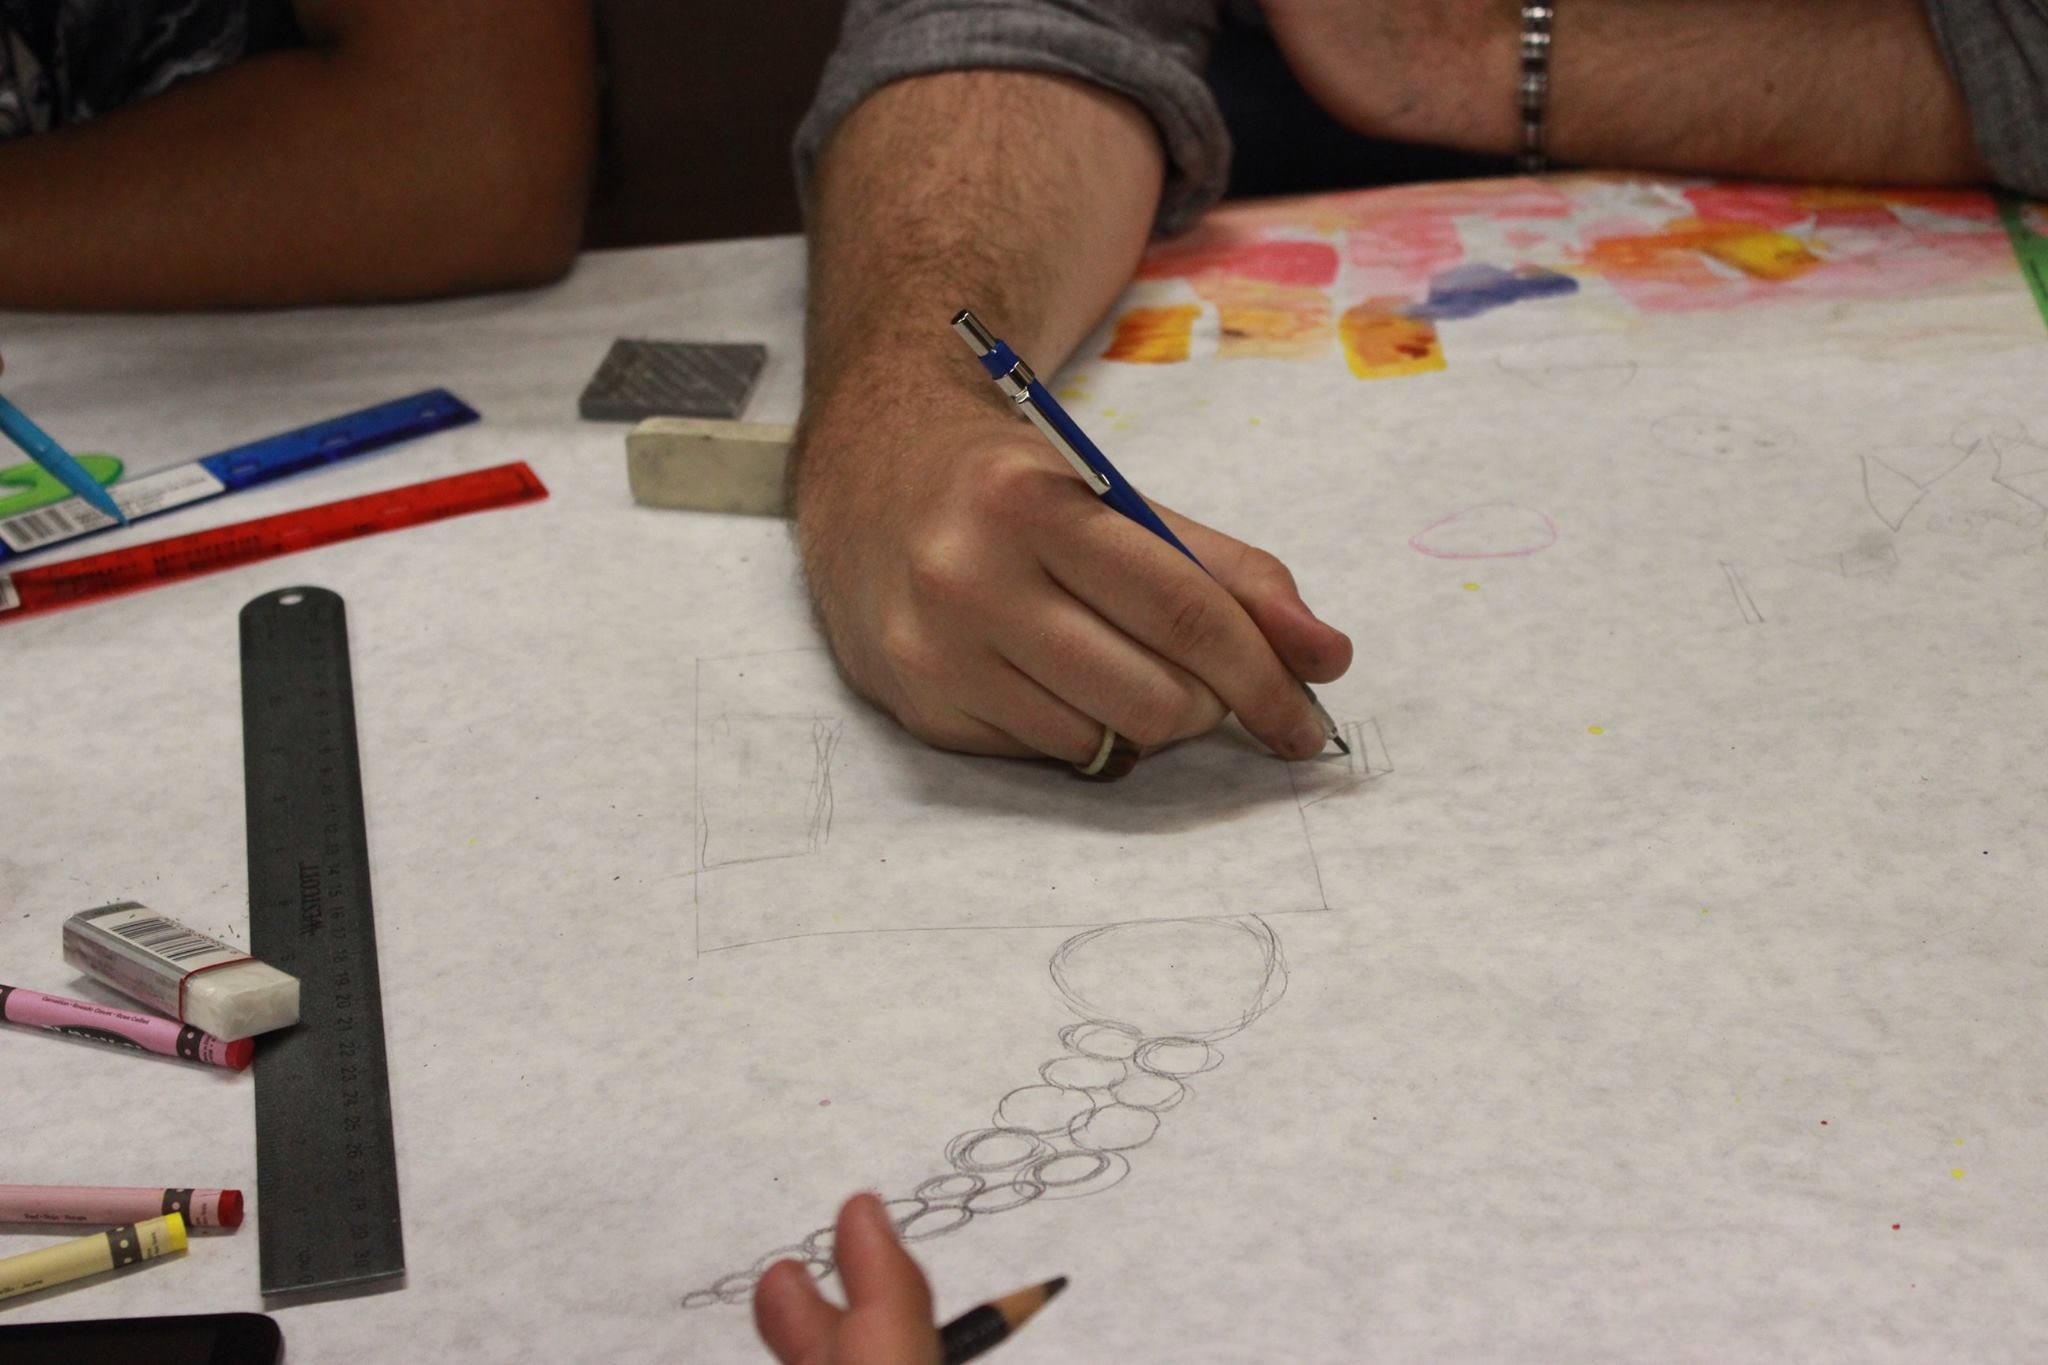 Participants Draw with Pencil Before Coloring Designs